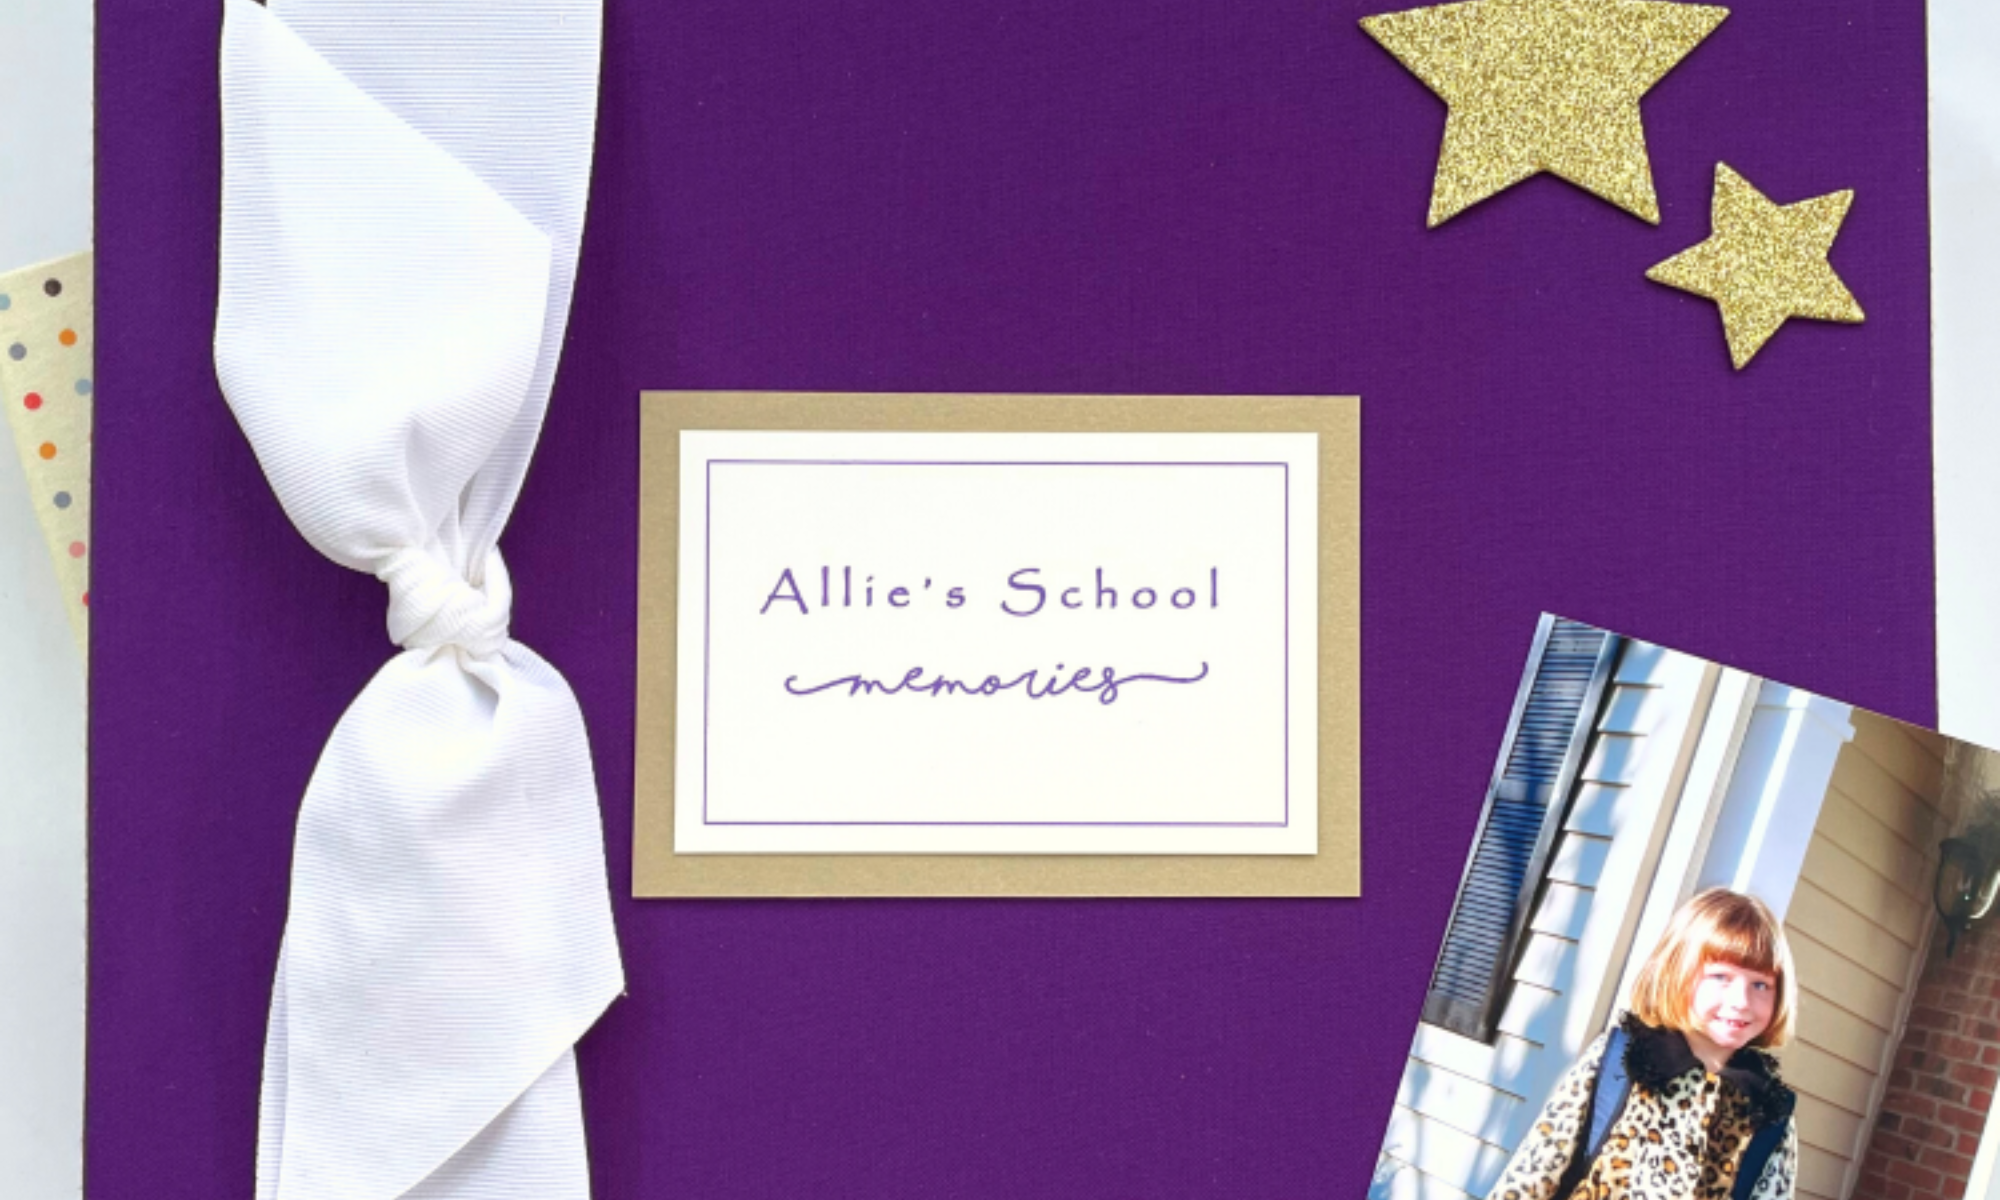 Purple cloth cover grade school memory book with white grosgrain bow and gold name plaque